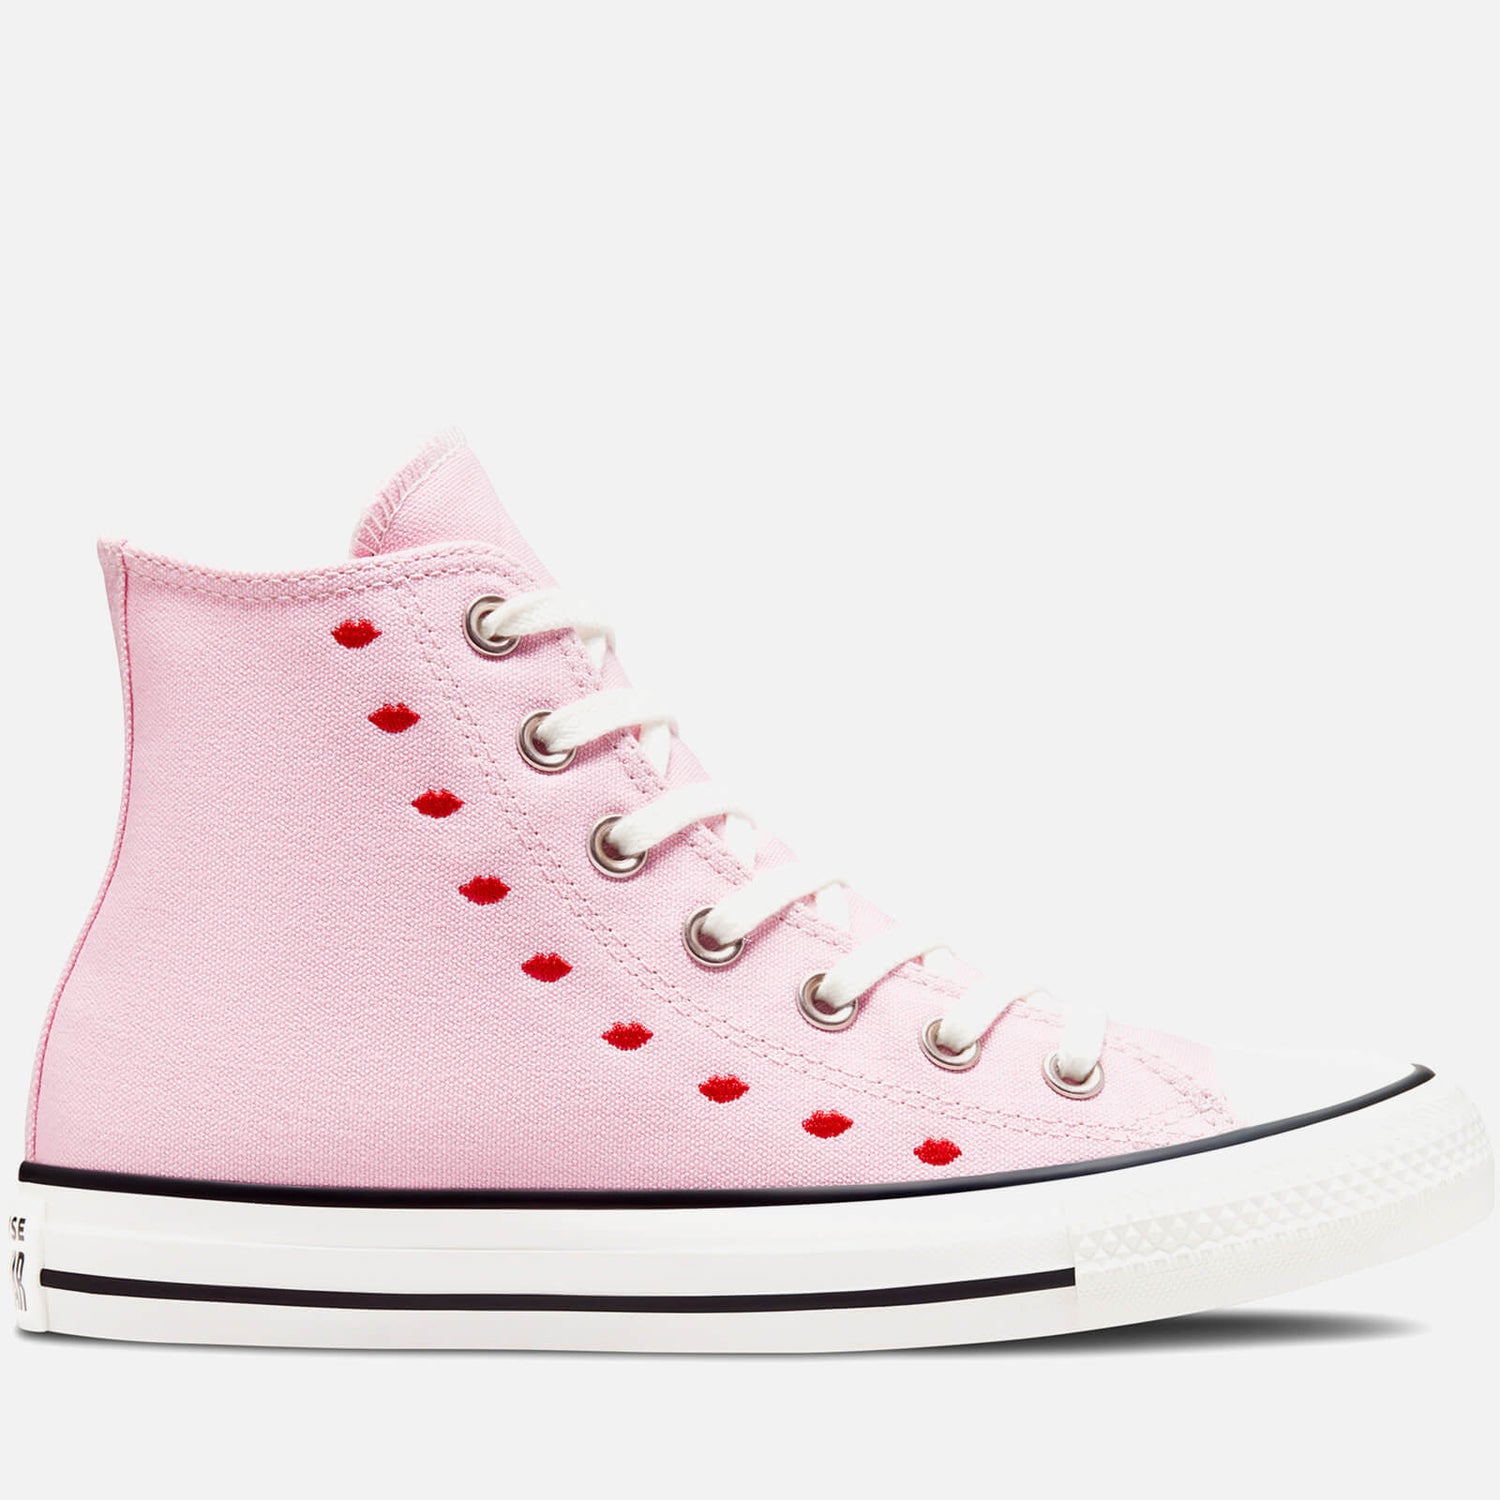 Converse Women's Chuck Taylor All Star Crafted With Love Hi-Top Trainers - Cherry Blossom/White - UK 3